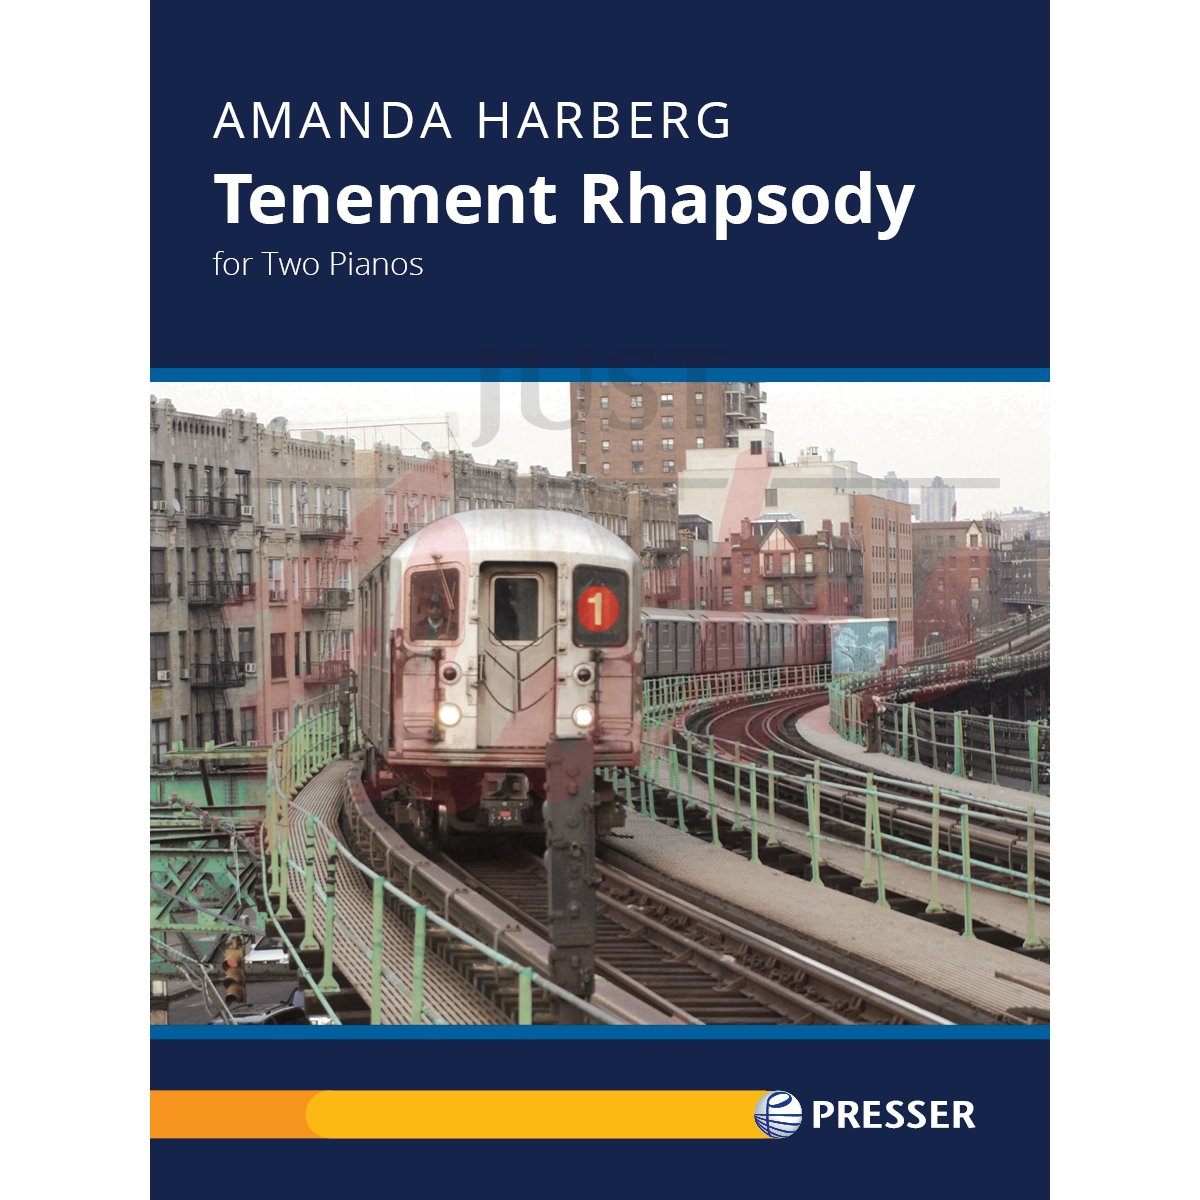 Tenement Rhapsody for Two Pianos